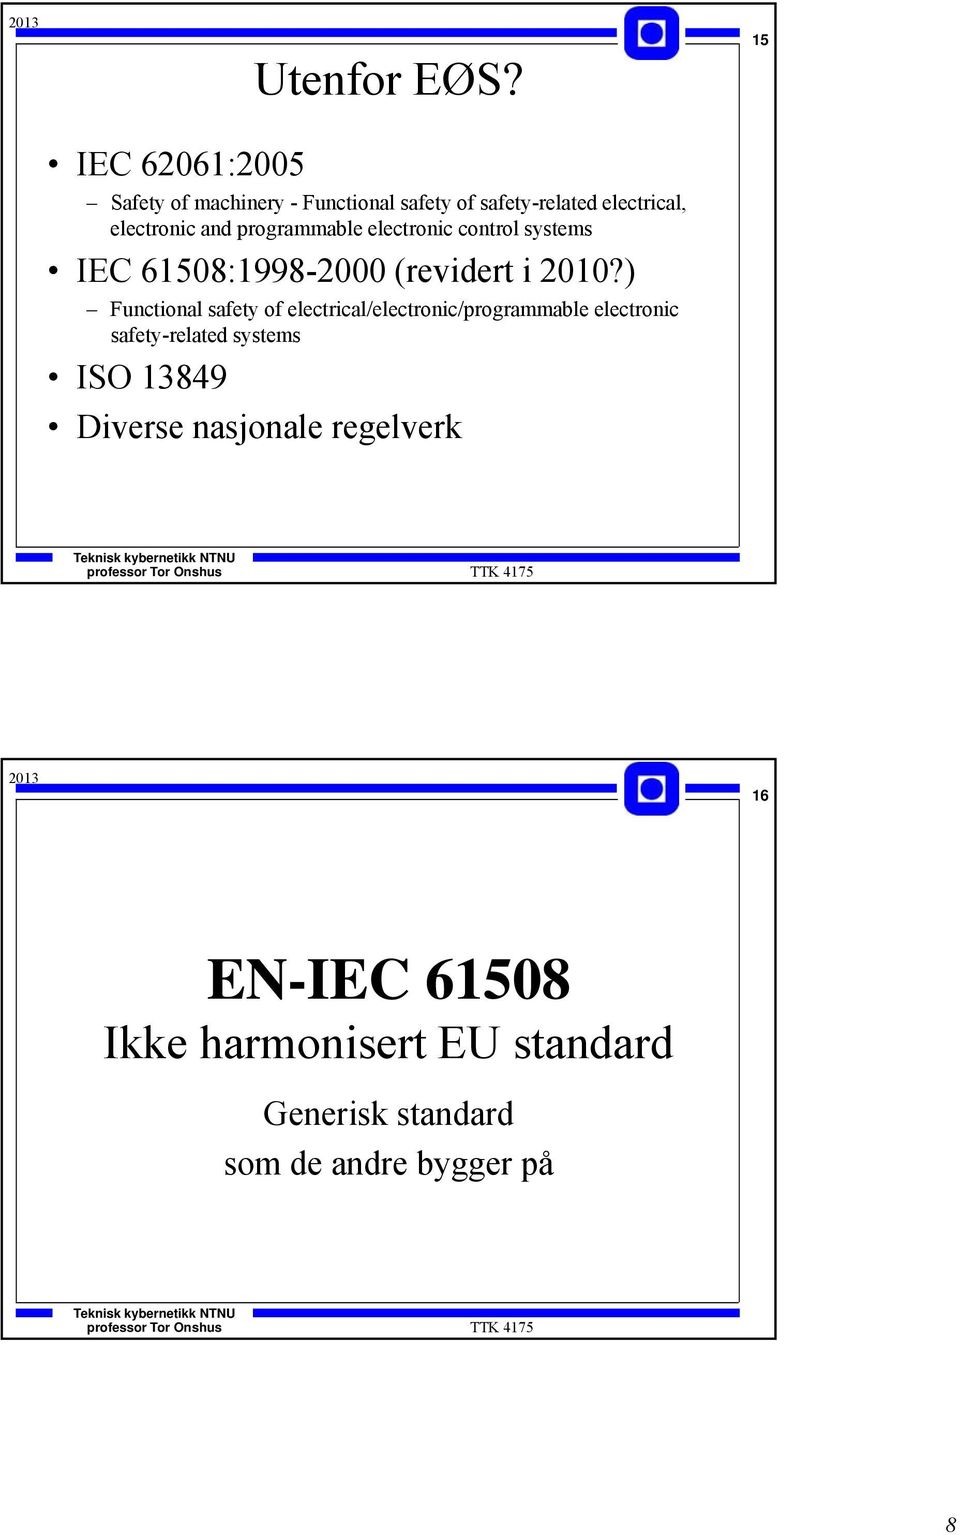 programmable electronic control systems IEC 61508:1998-2000 (revidert i 2010?